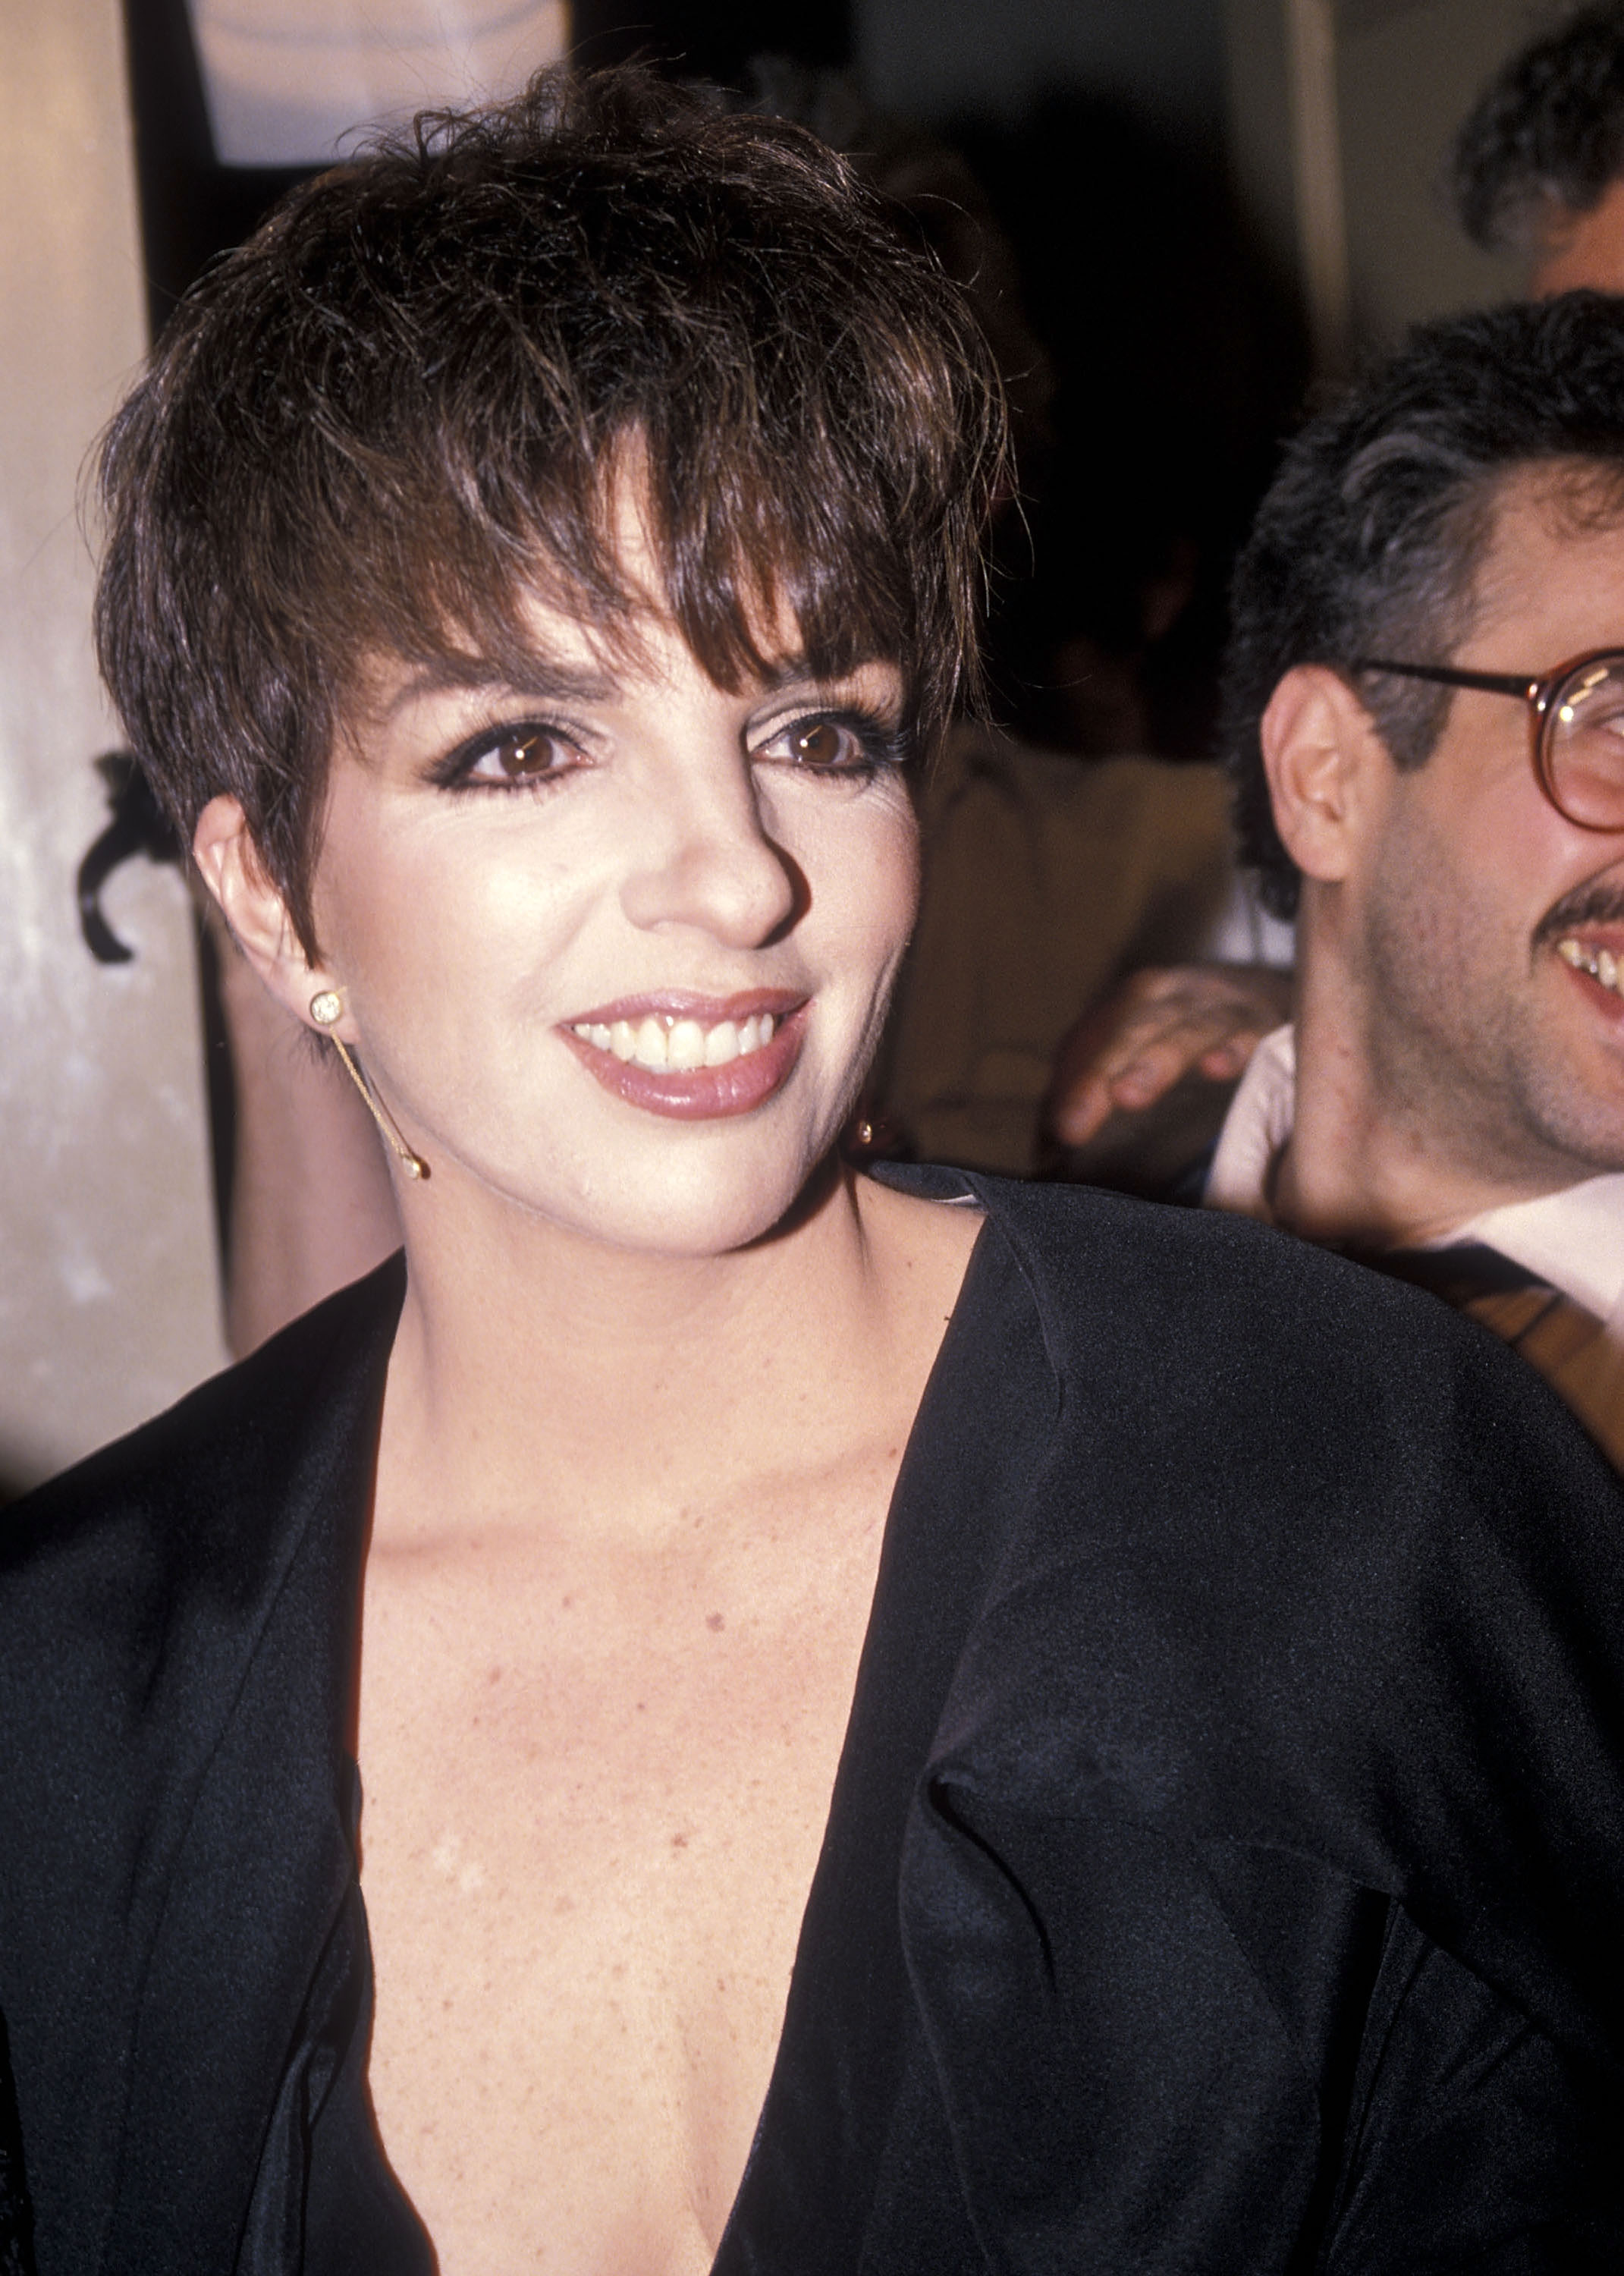 Liza Minnelli attends the 56th Annual Drama League Awards at the Pierre Hotel on February 5, 1990, in New York City. | Source: Getty Images